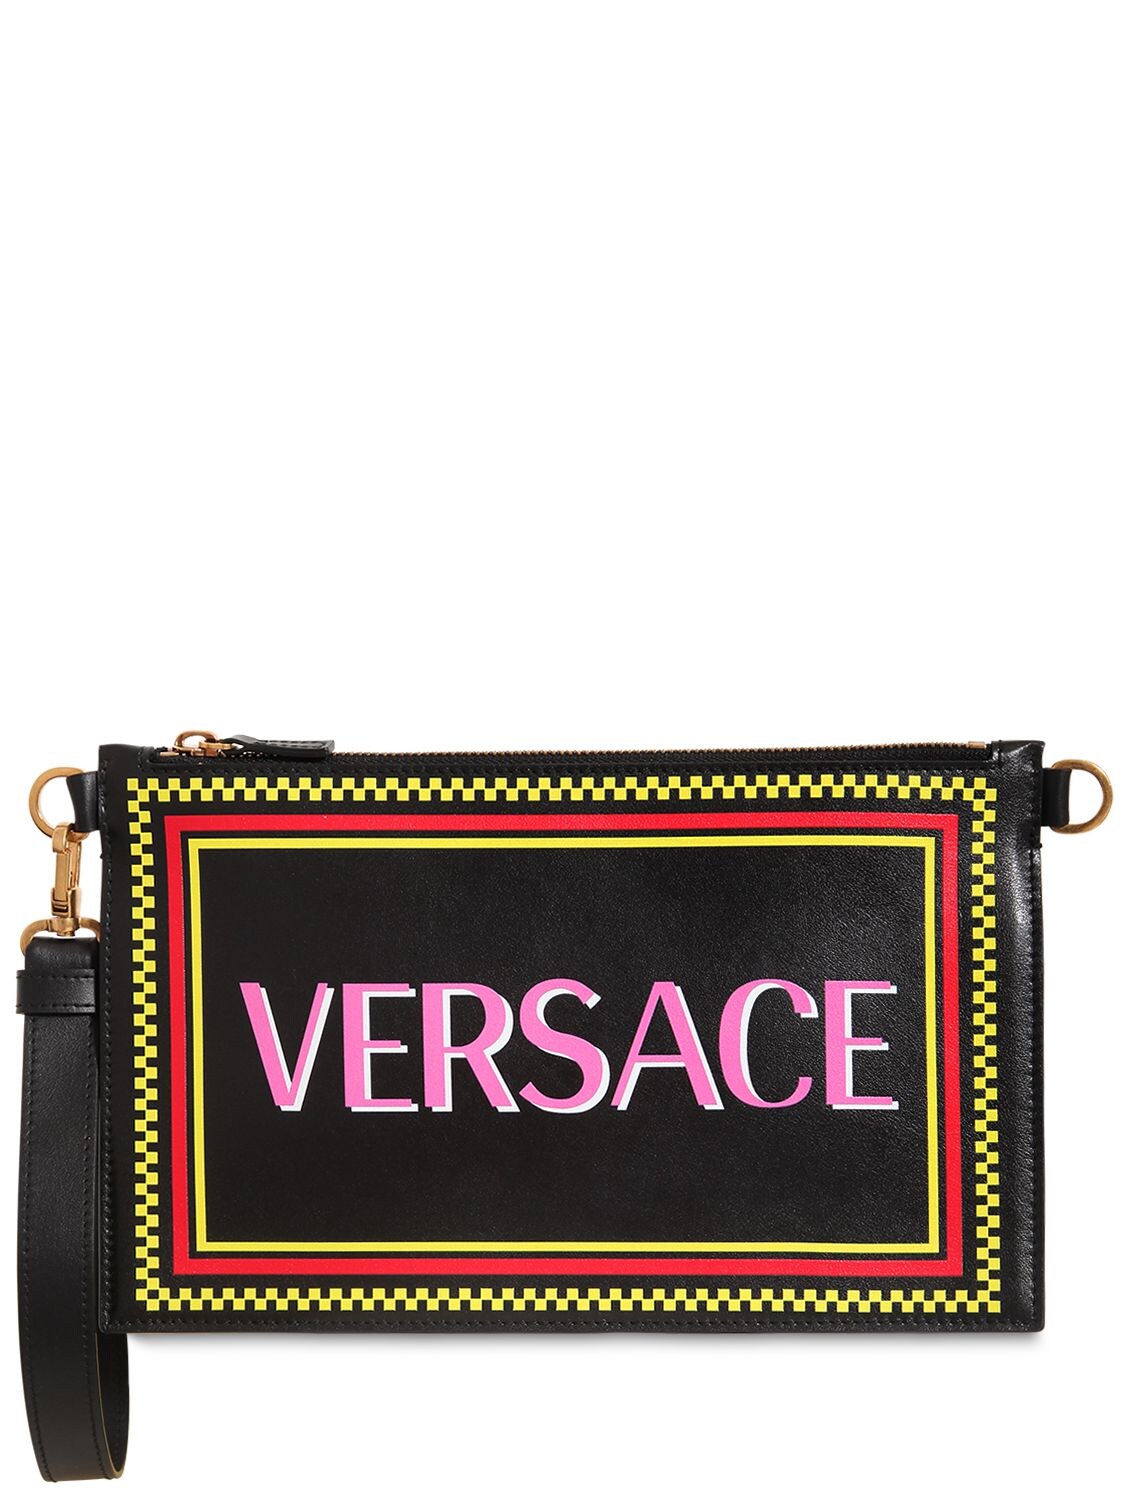 VERSACE MULTICOLOR LOGO LEATHER CLUTCH,69IGGF002-RE5NT1Q1